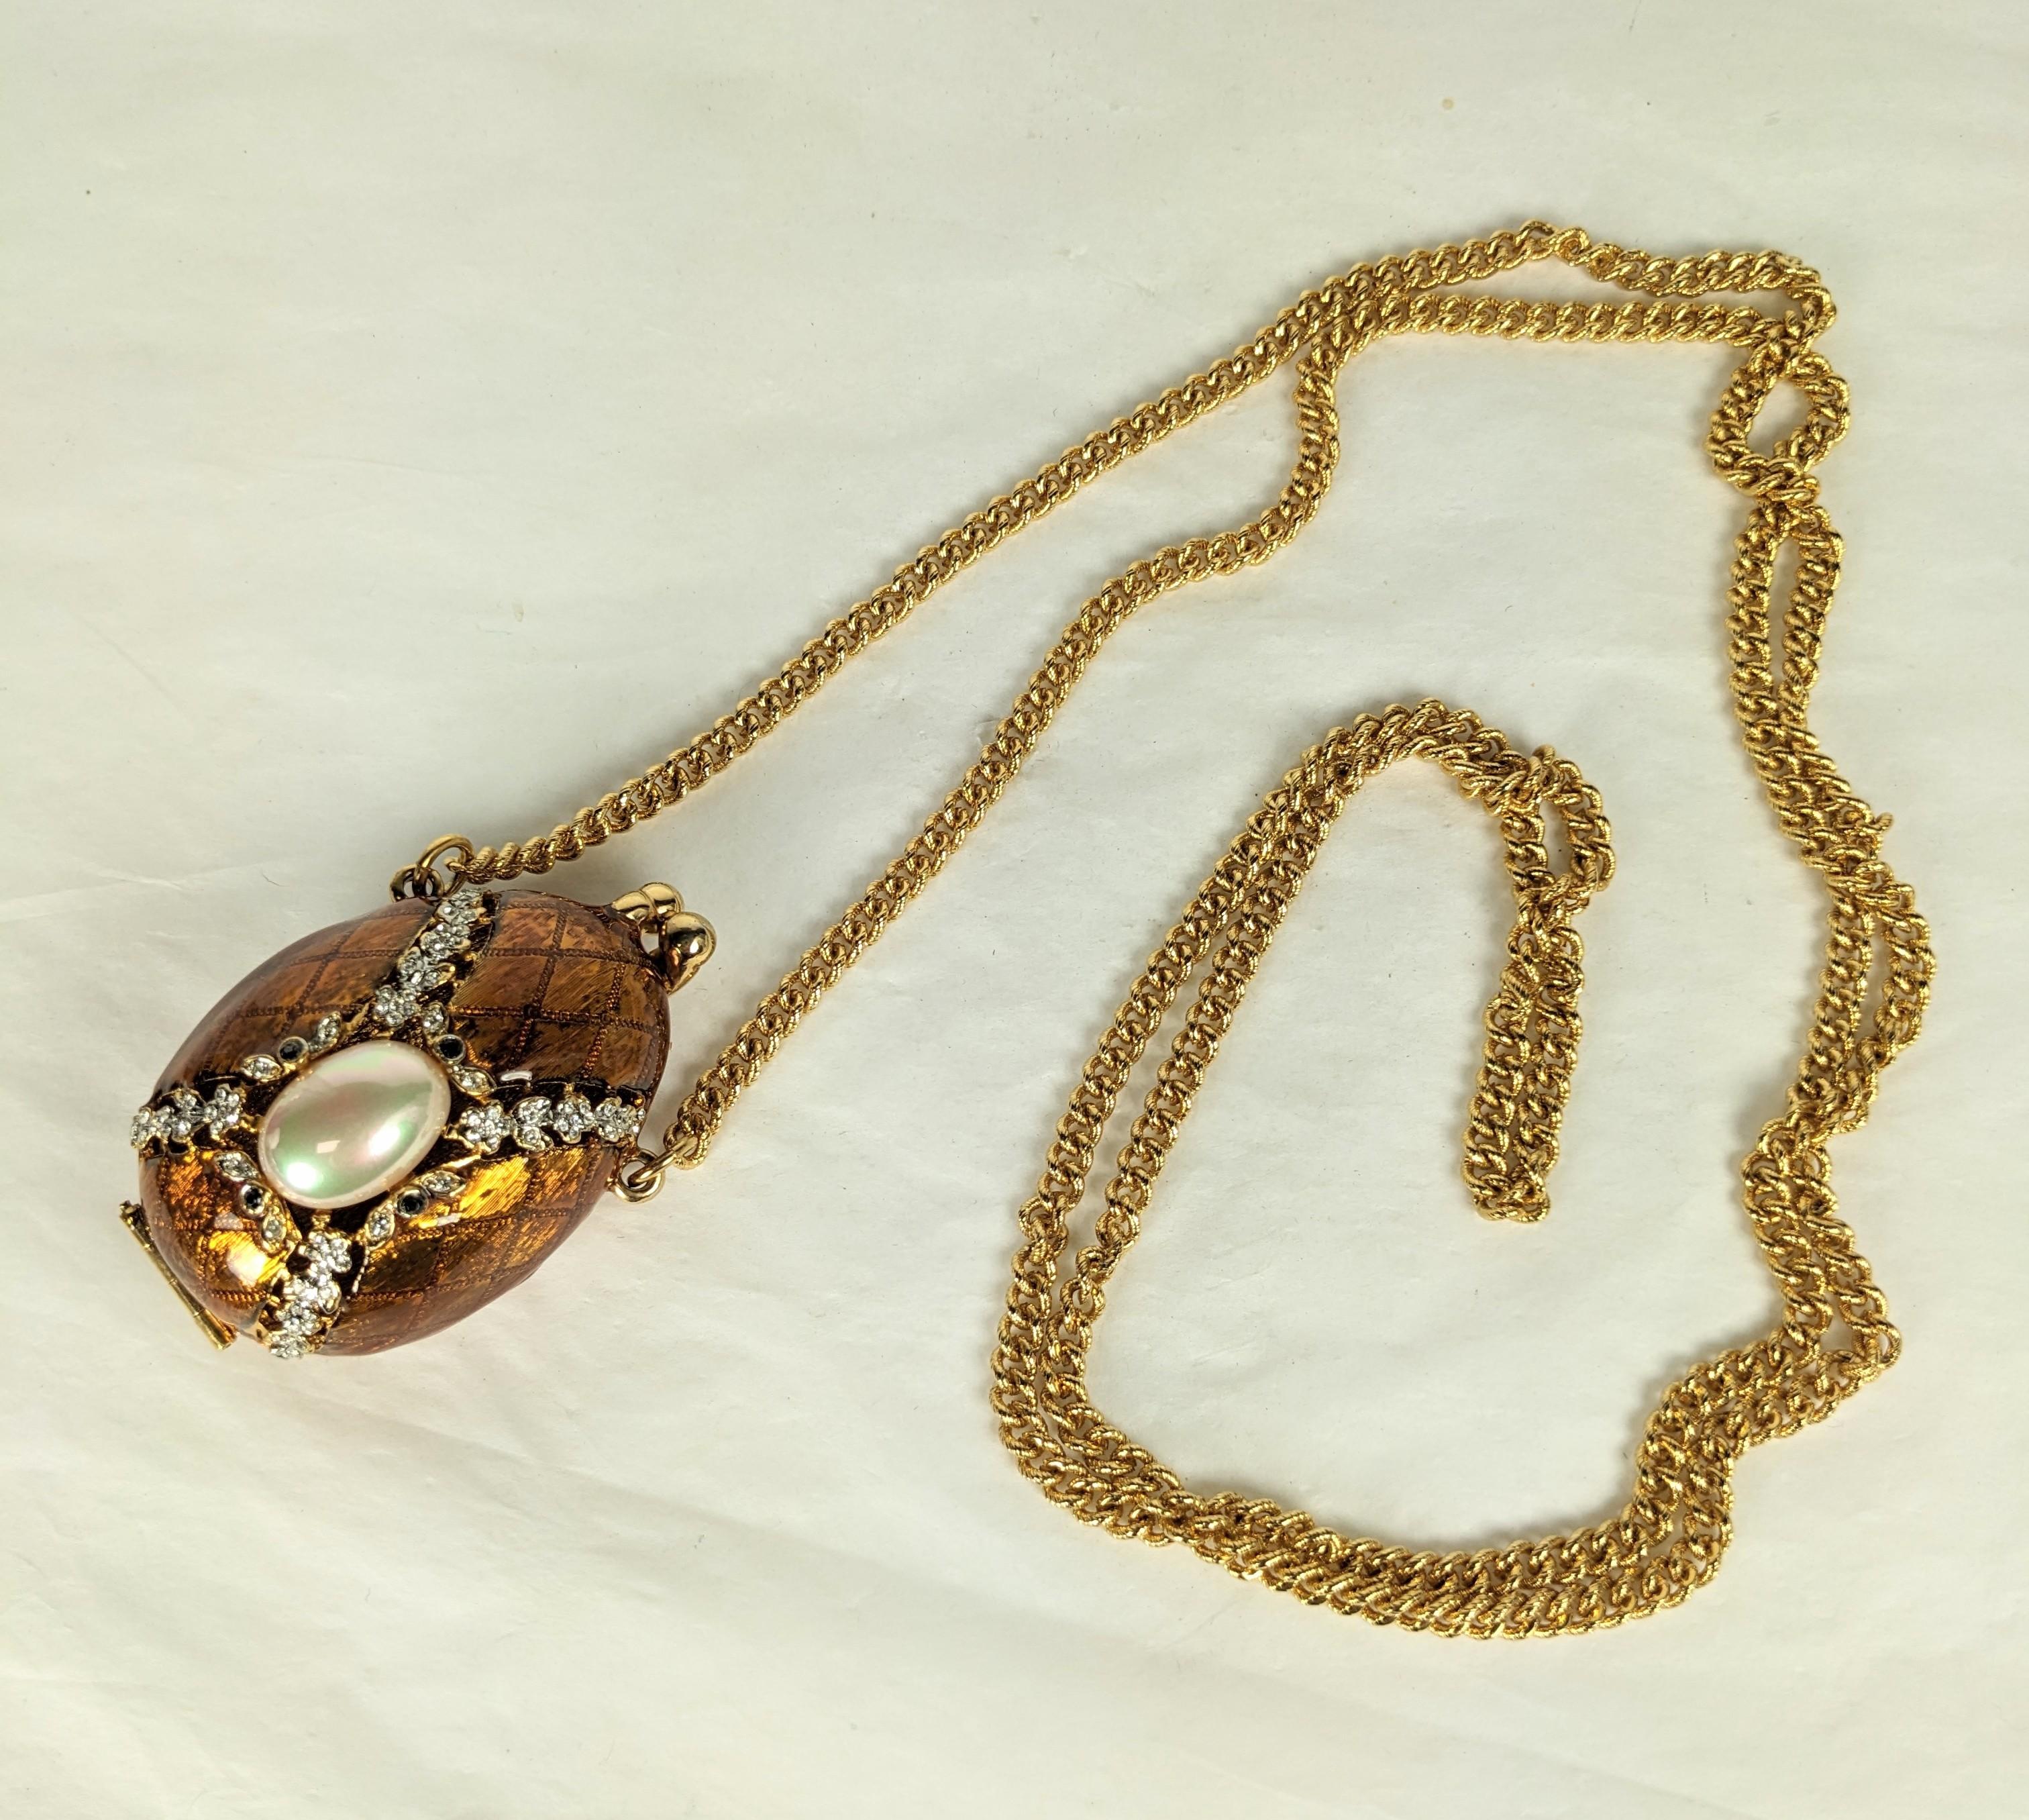 Enamel Faberge Easter egg pendant purse locket from the 1990's. Enamel in tones of brown copper with crystal and jet pastes. Can be worn crossbody as well. Egg 2.5